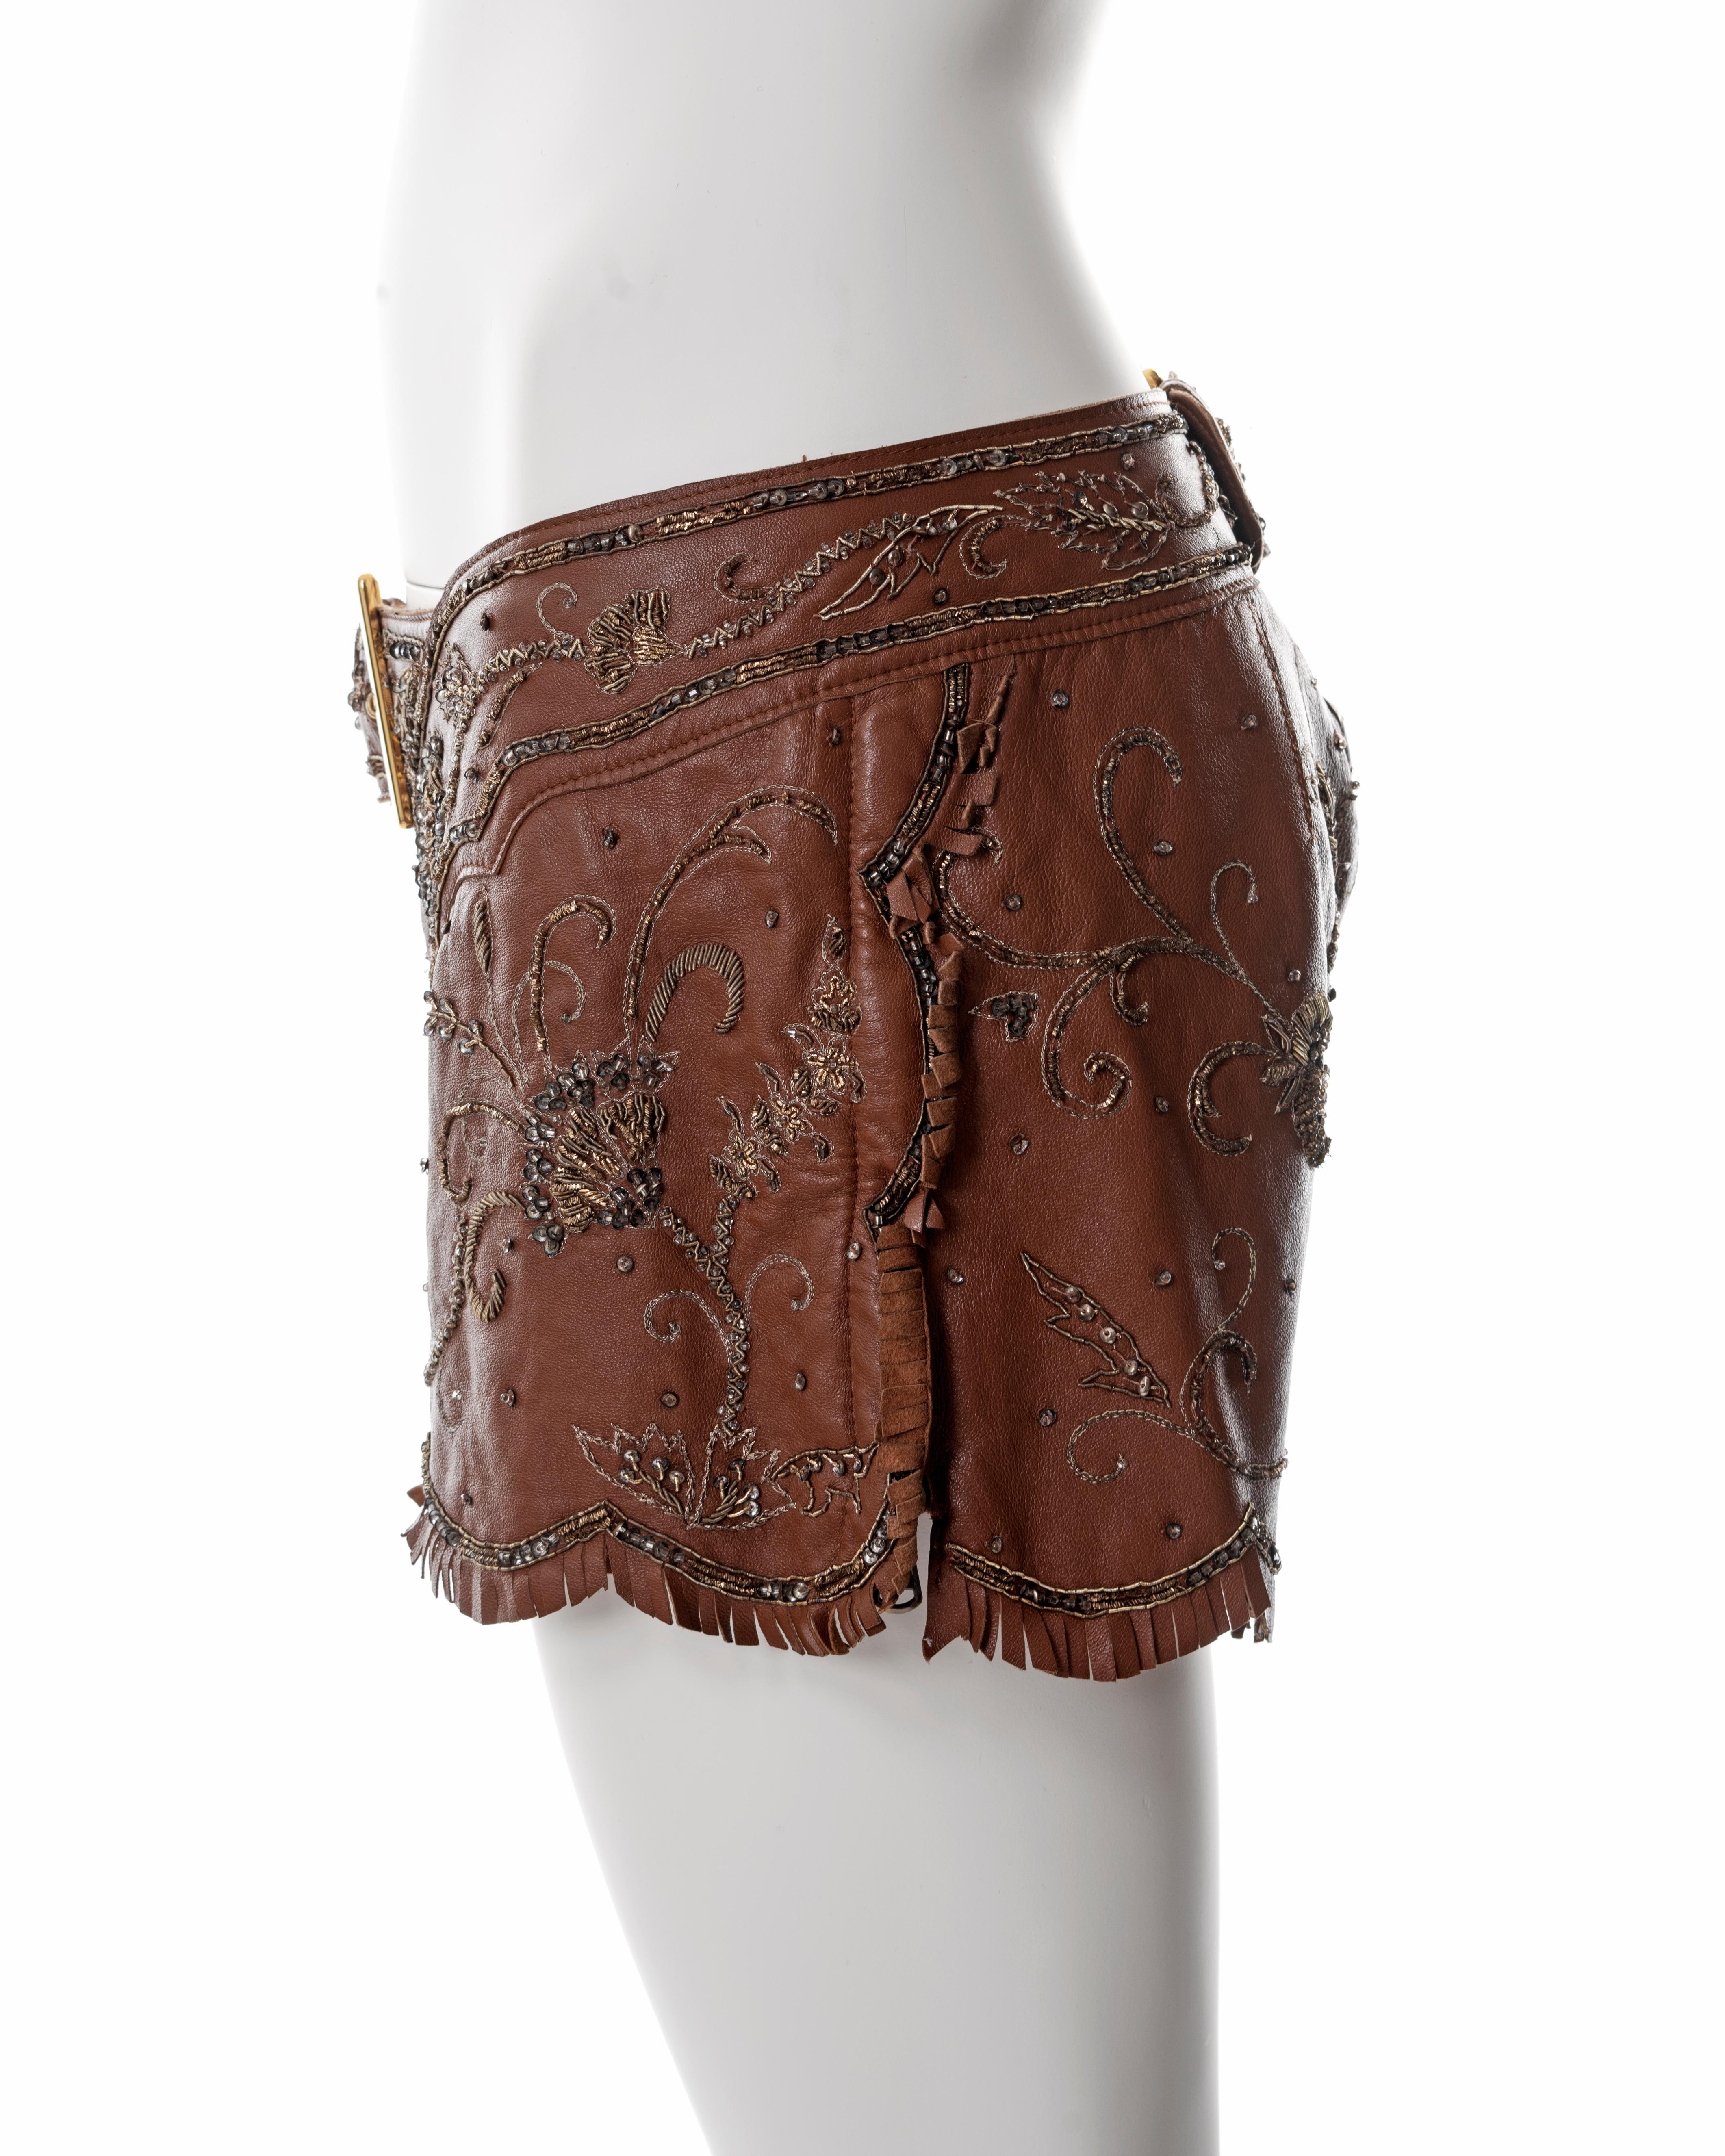 Dolce & Gabbana embroidered brown leather hot pants, ss 2001 5